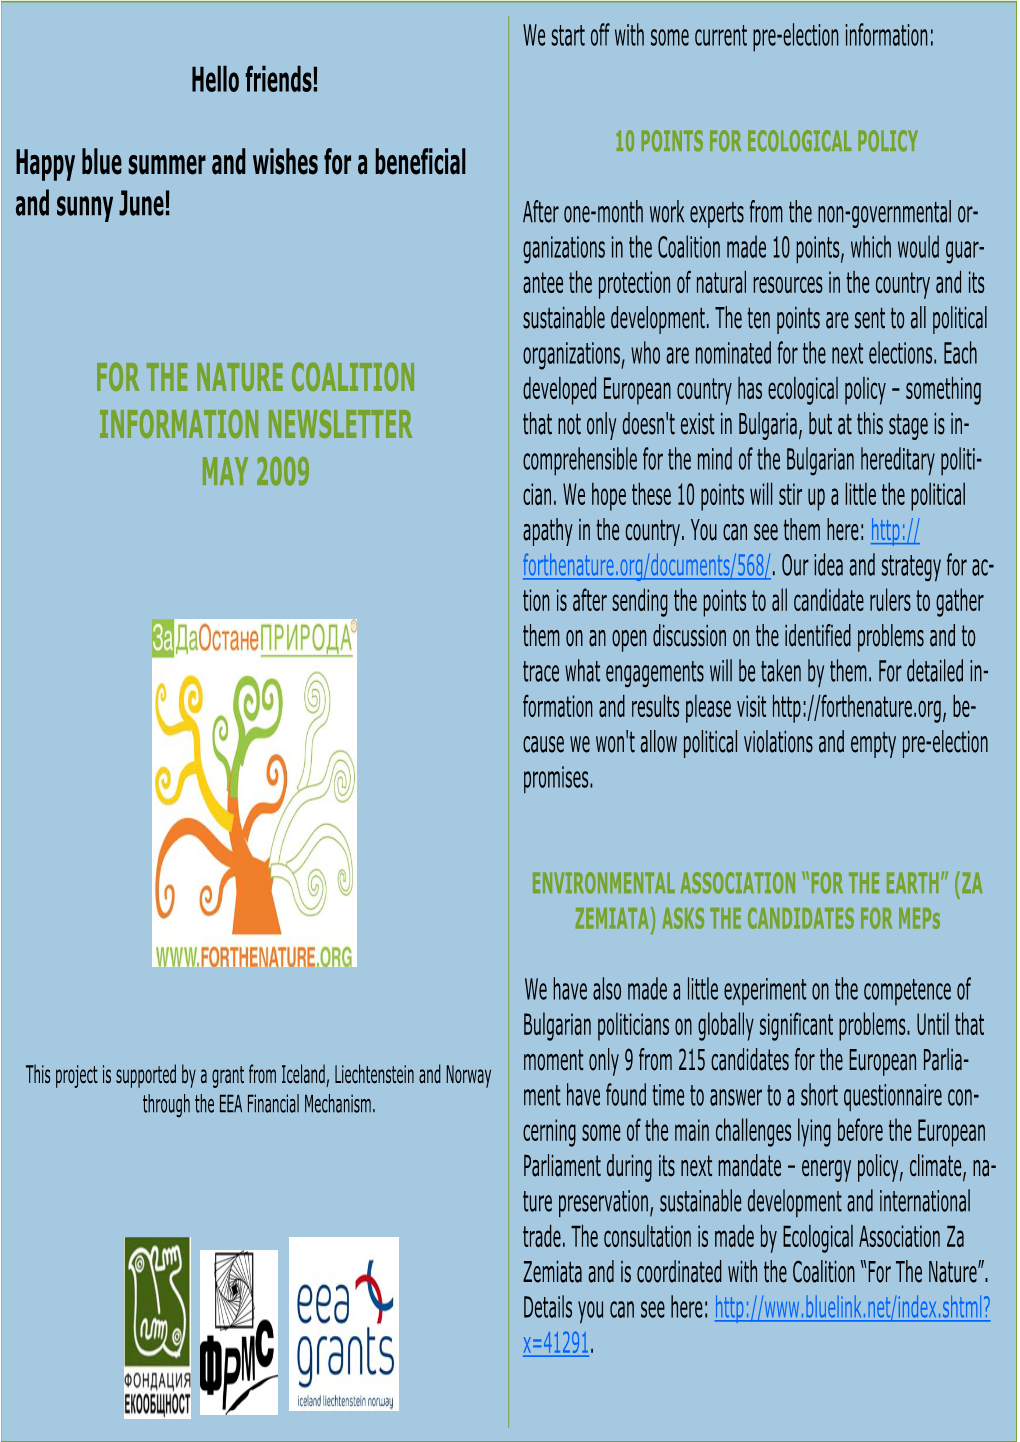 For the Nature Coalition Information Newsletter